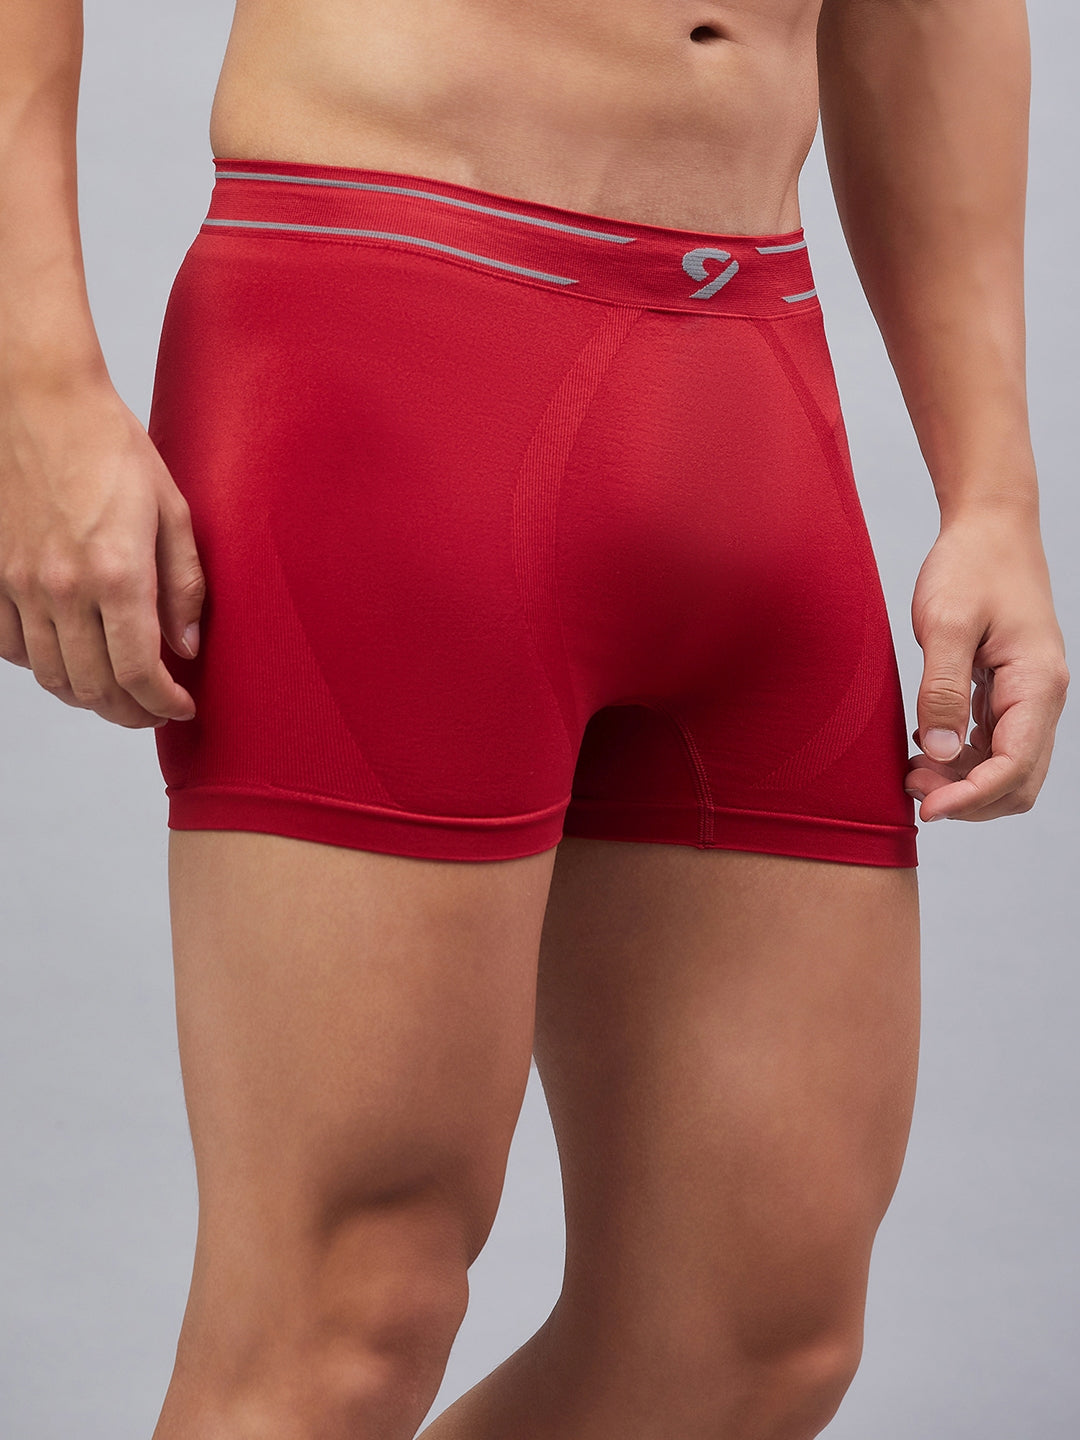 C9 Airwear Red Seamless Trunk For Men